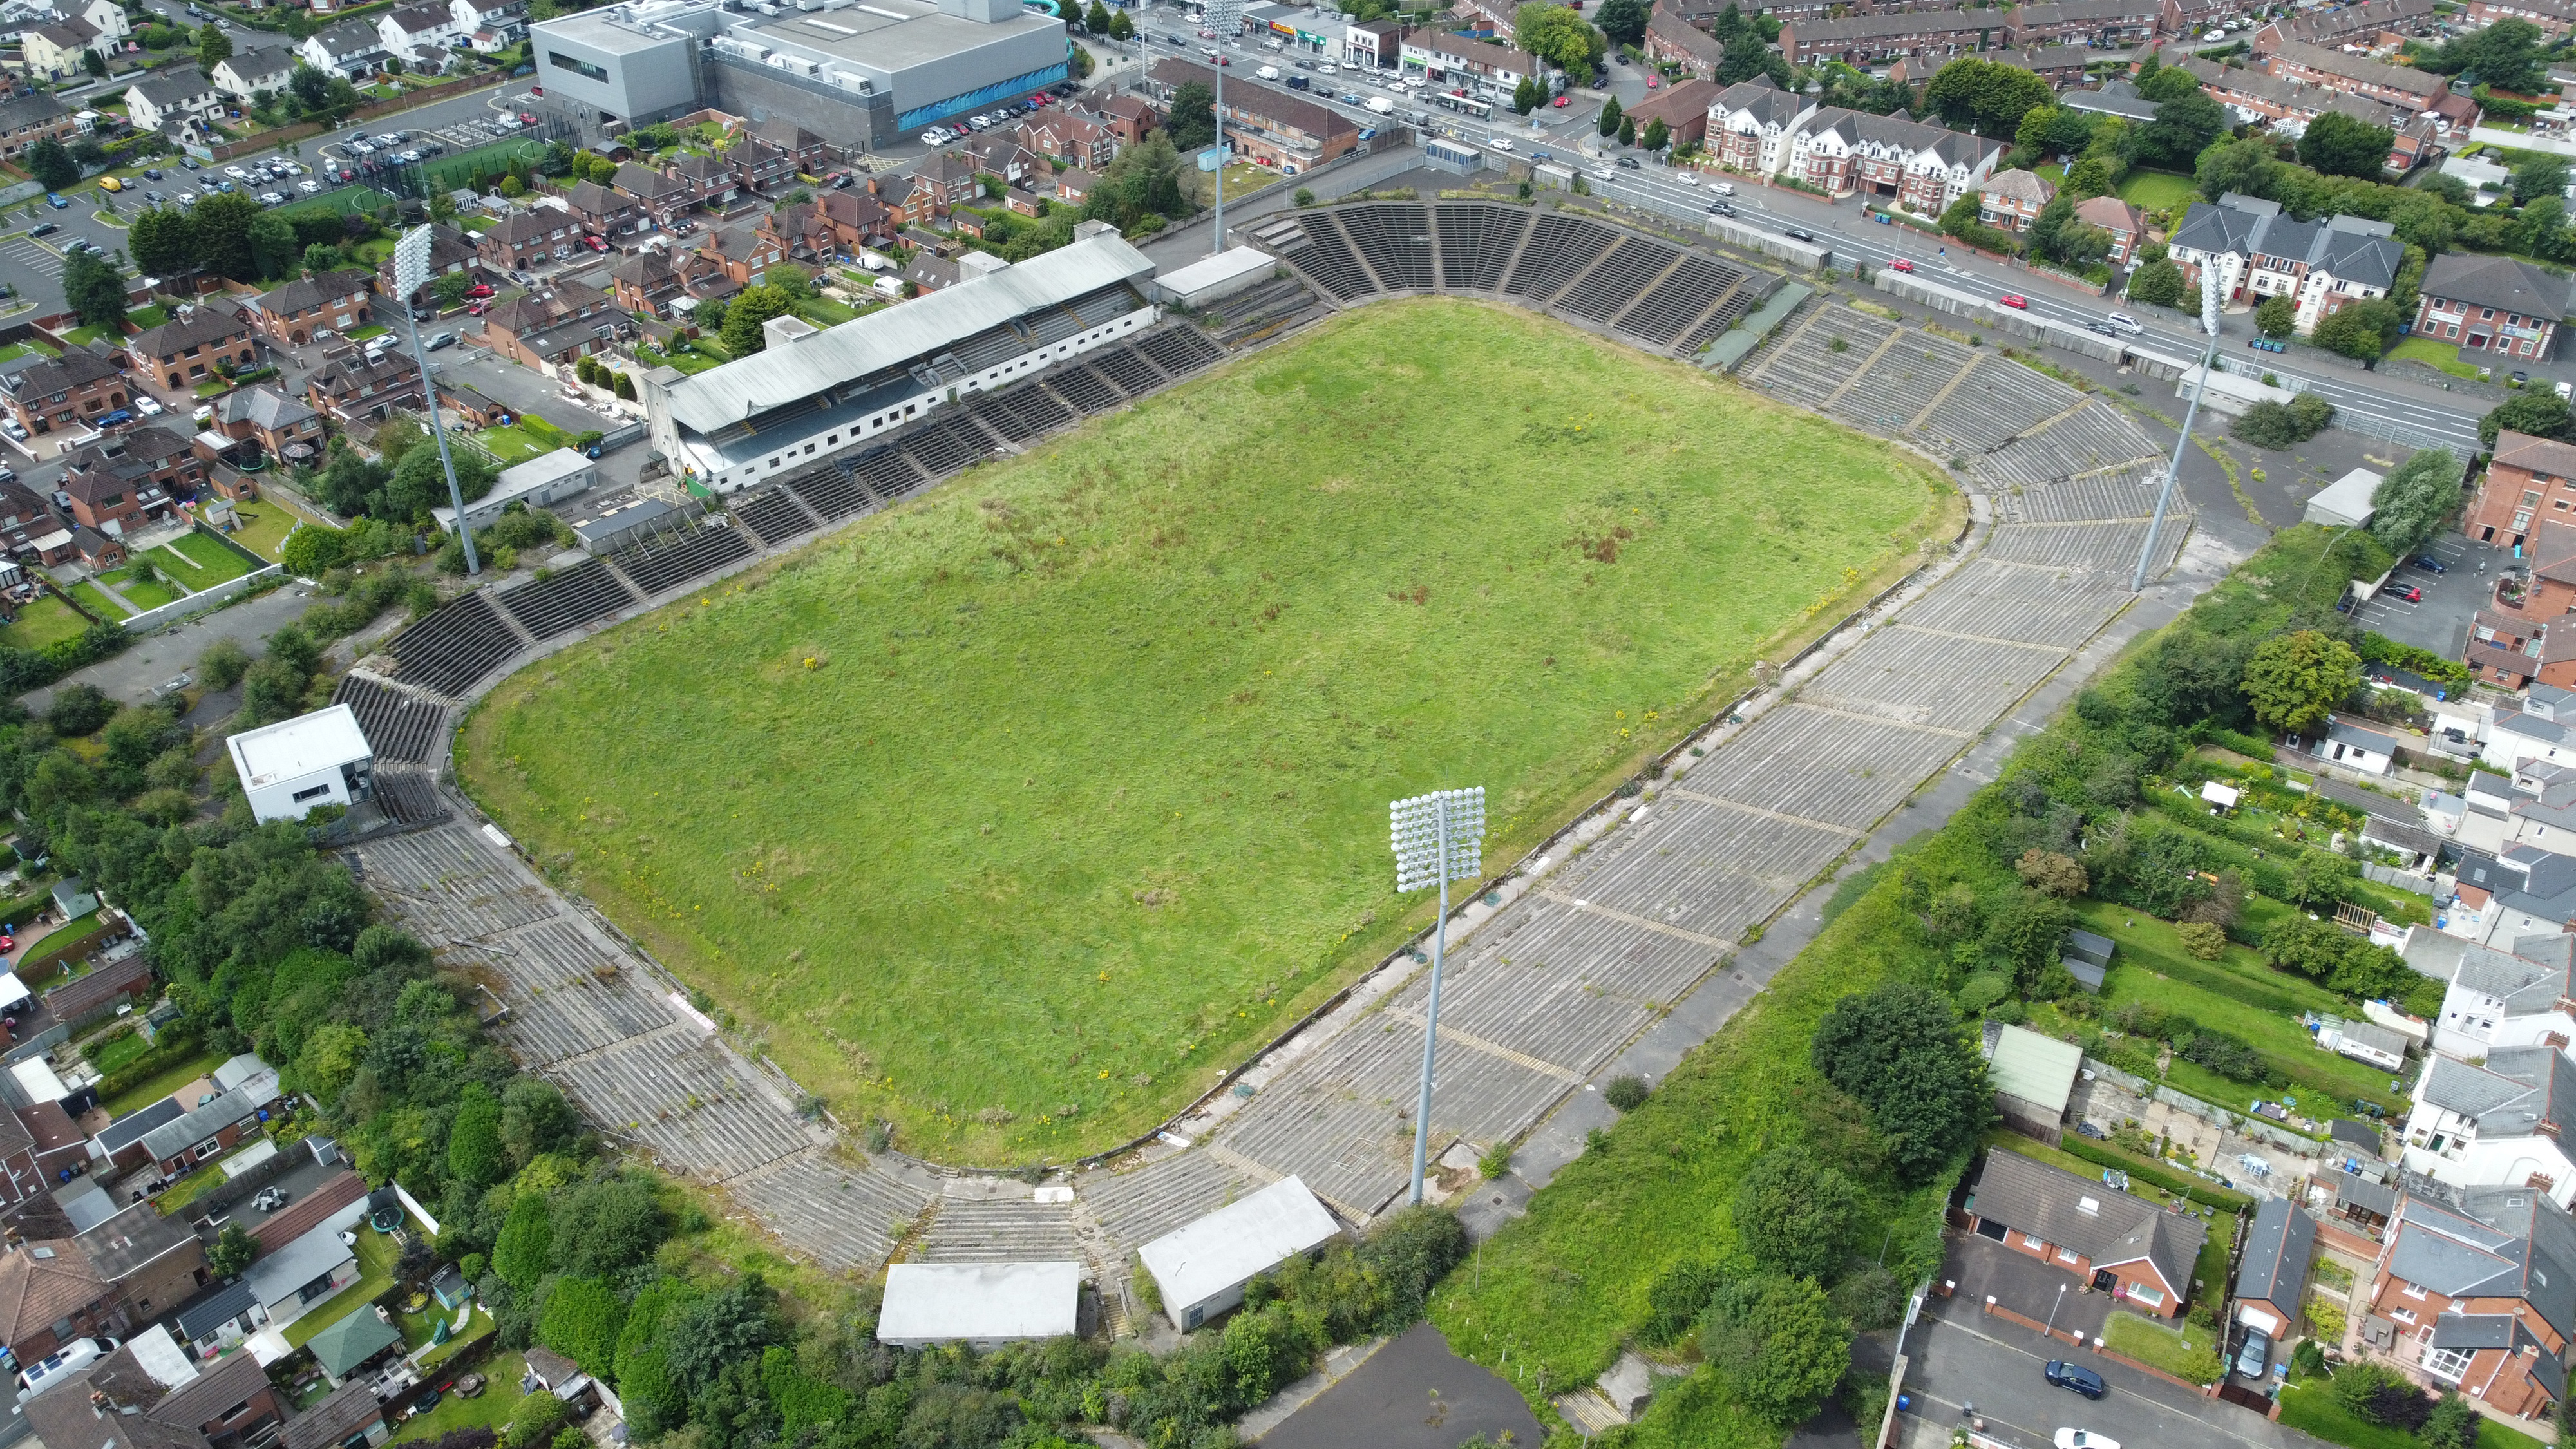 The Casement Park site photographed in August of this year